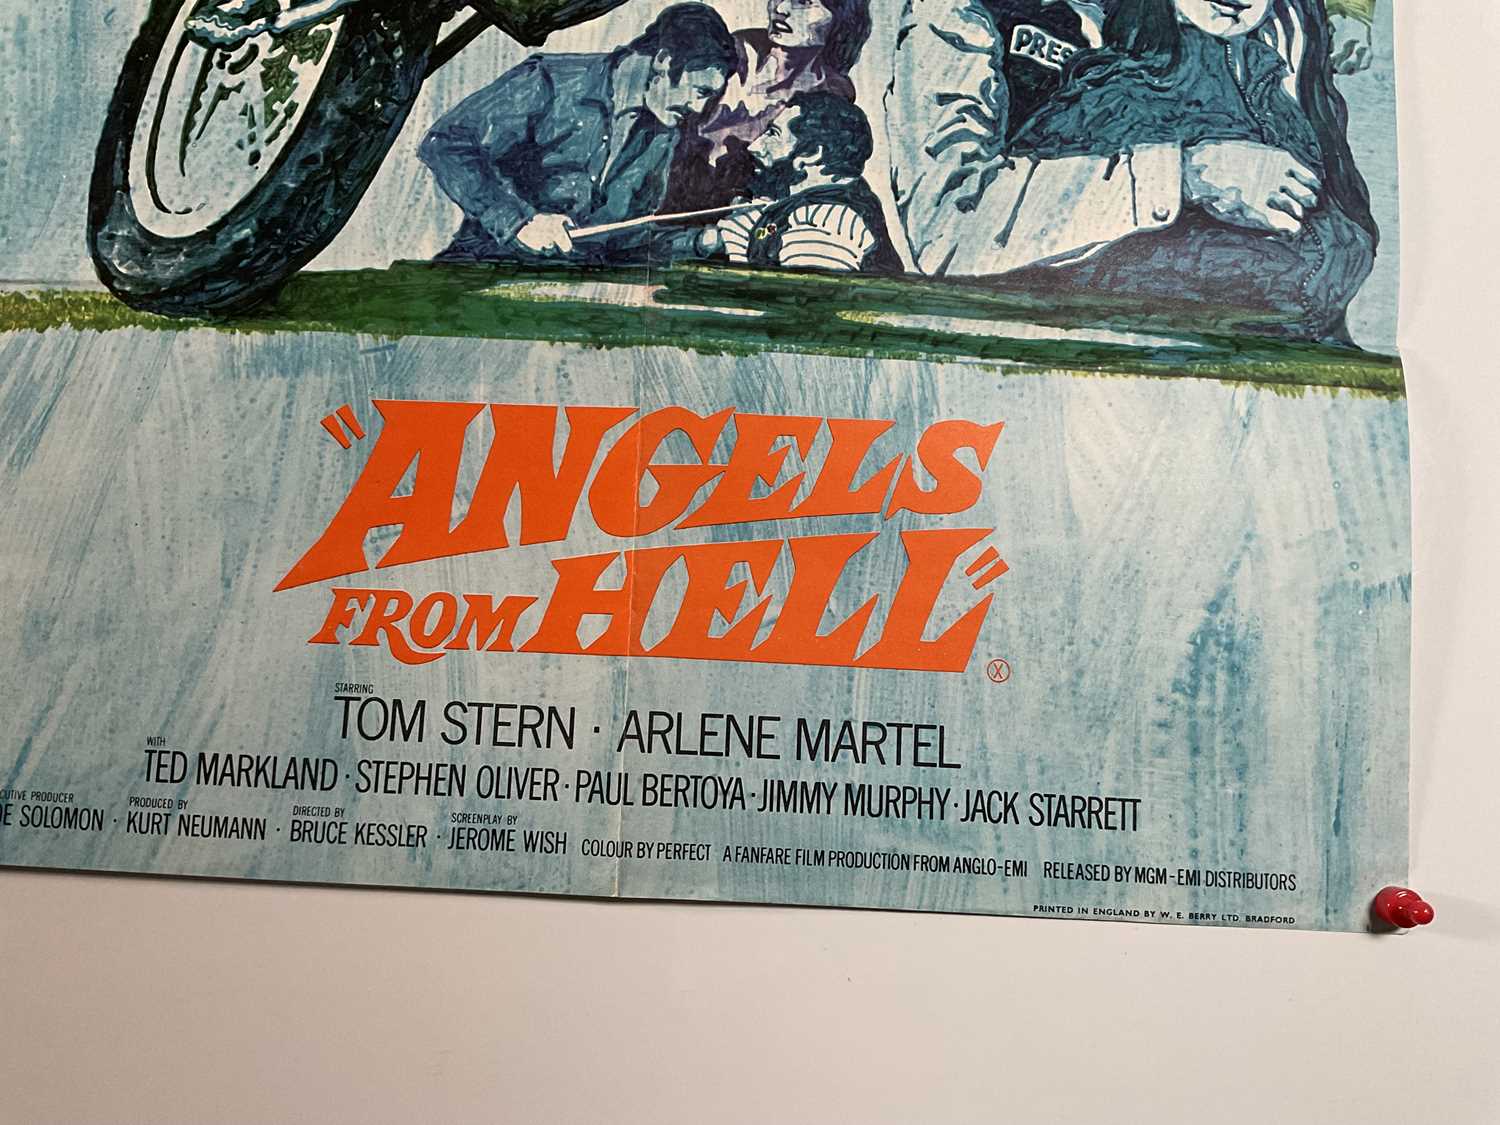 THE VAMPIRE LOVERS / ANGELS FROM HELL (1970) Double-Bill UK Quad film poster, Hammer Horror, first - Image 4 of 6